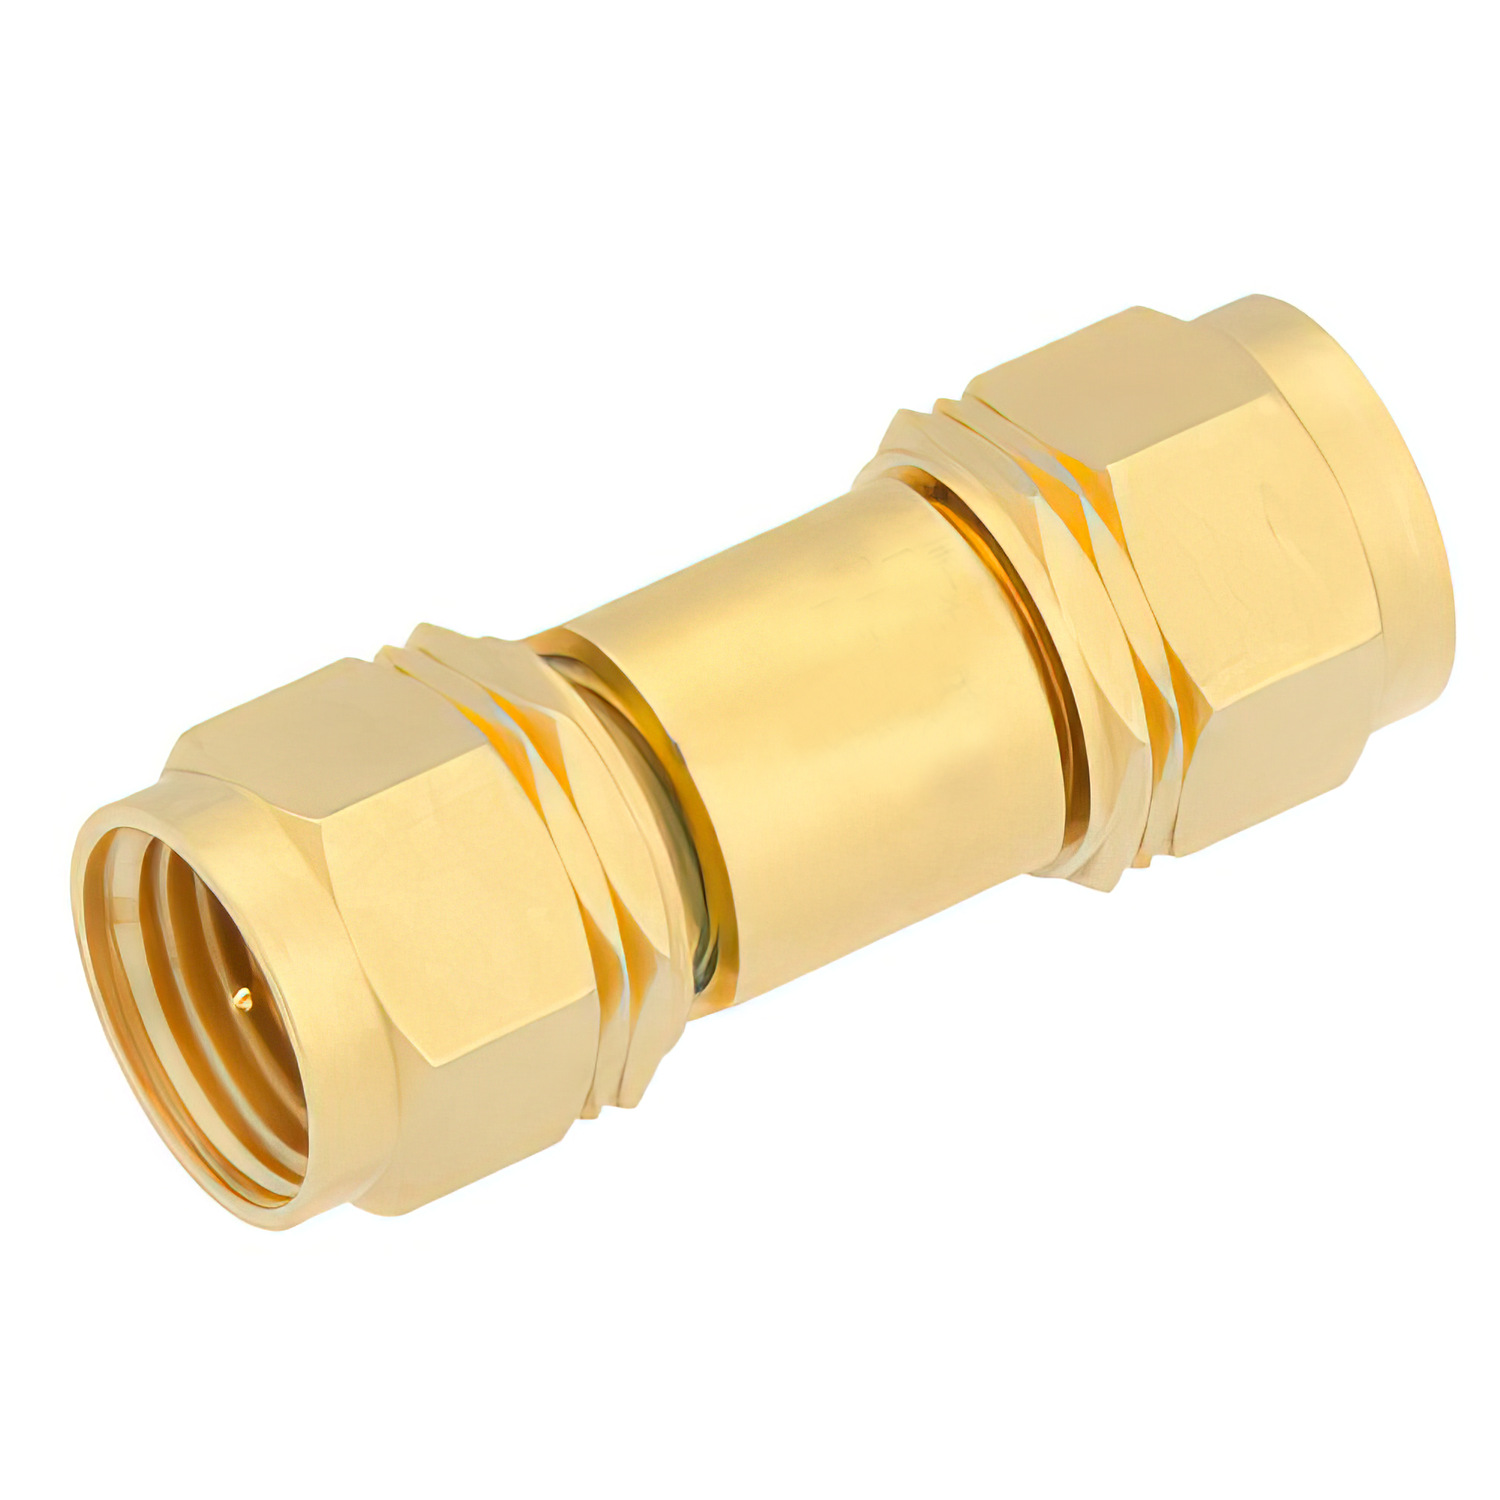 1.85mm male to 1.85mm male adapter1